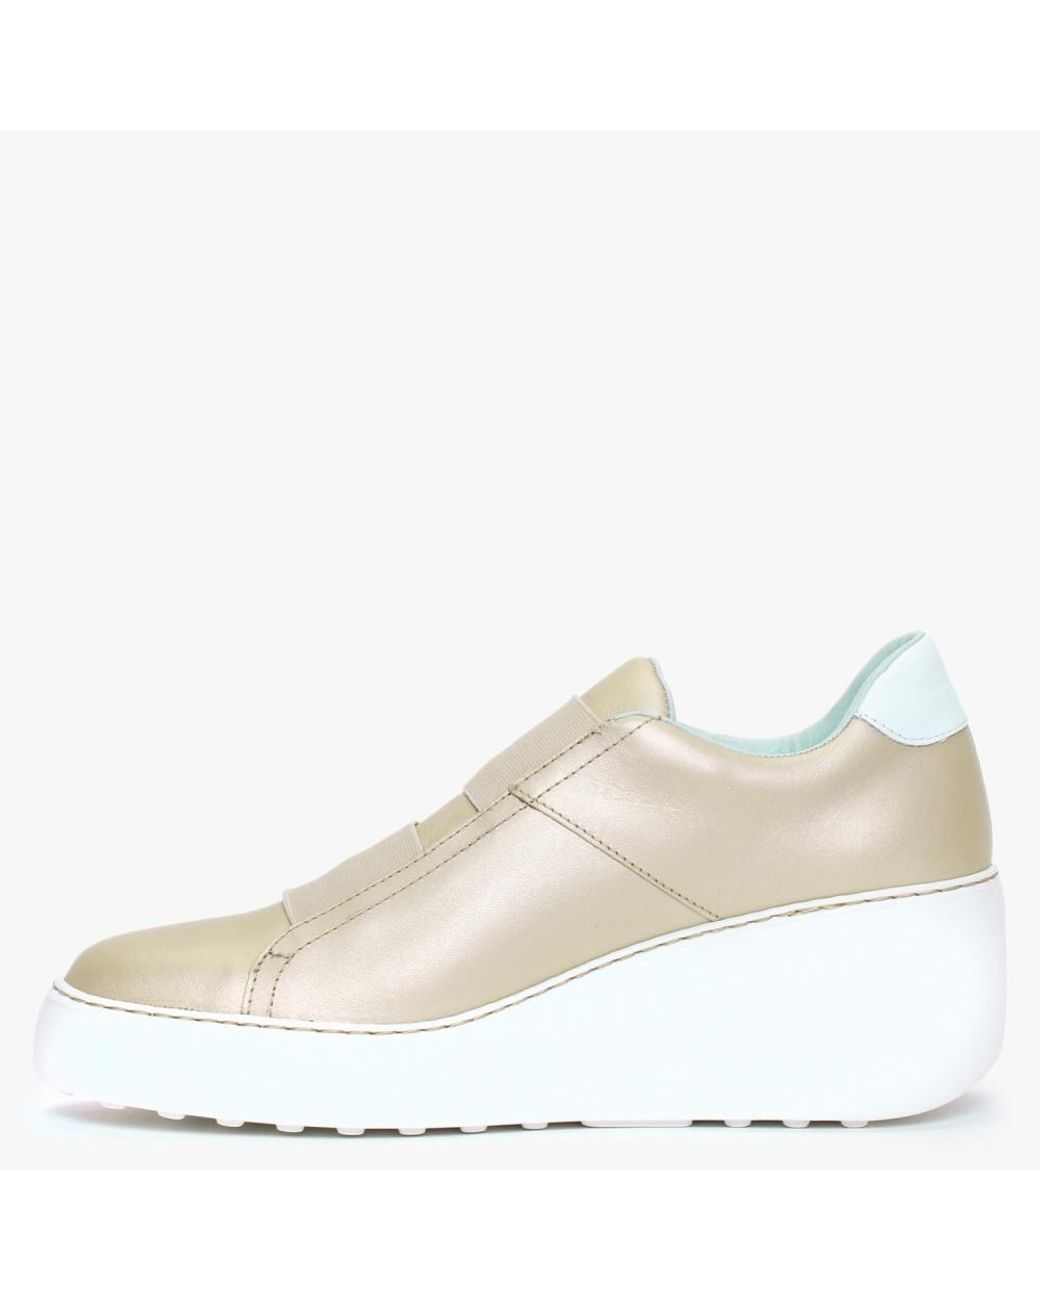 Fly London Dito Gold Leather Wedge Trainers in Natural | Lyst